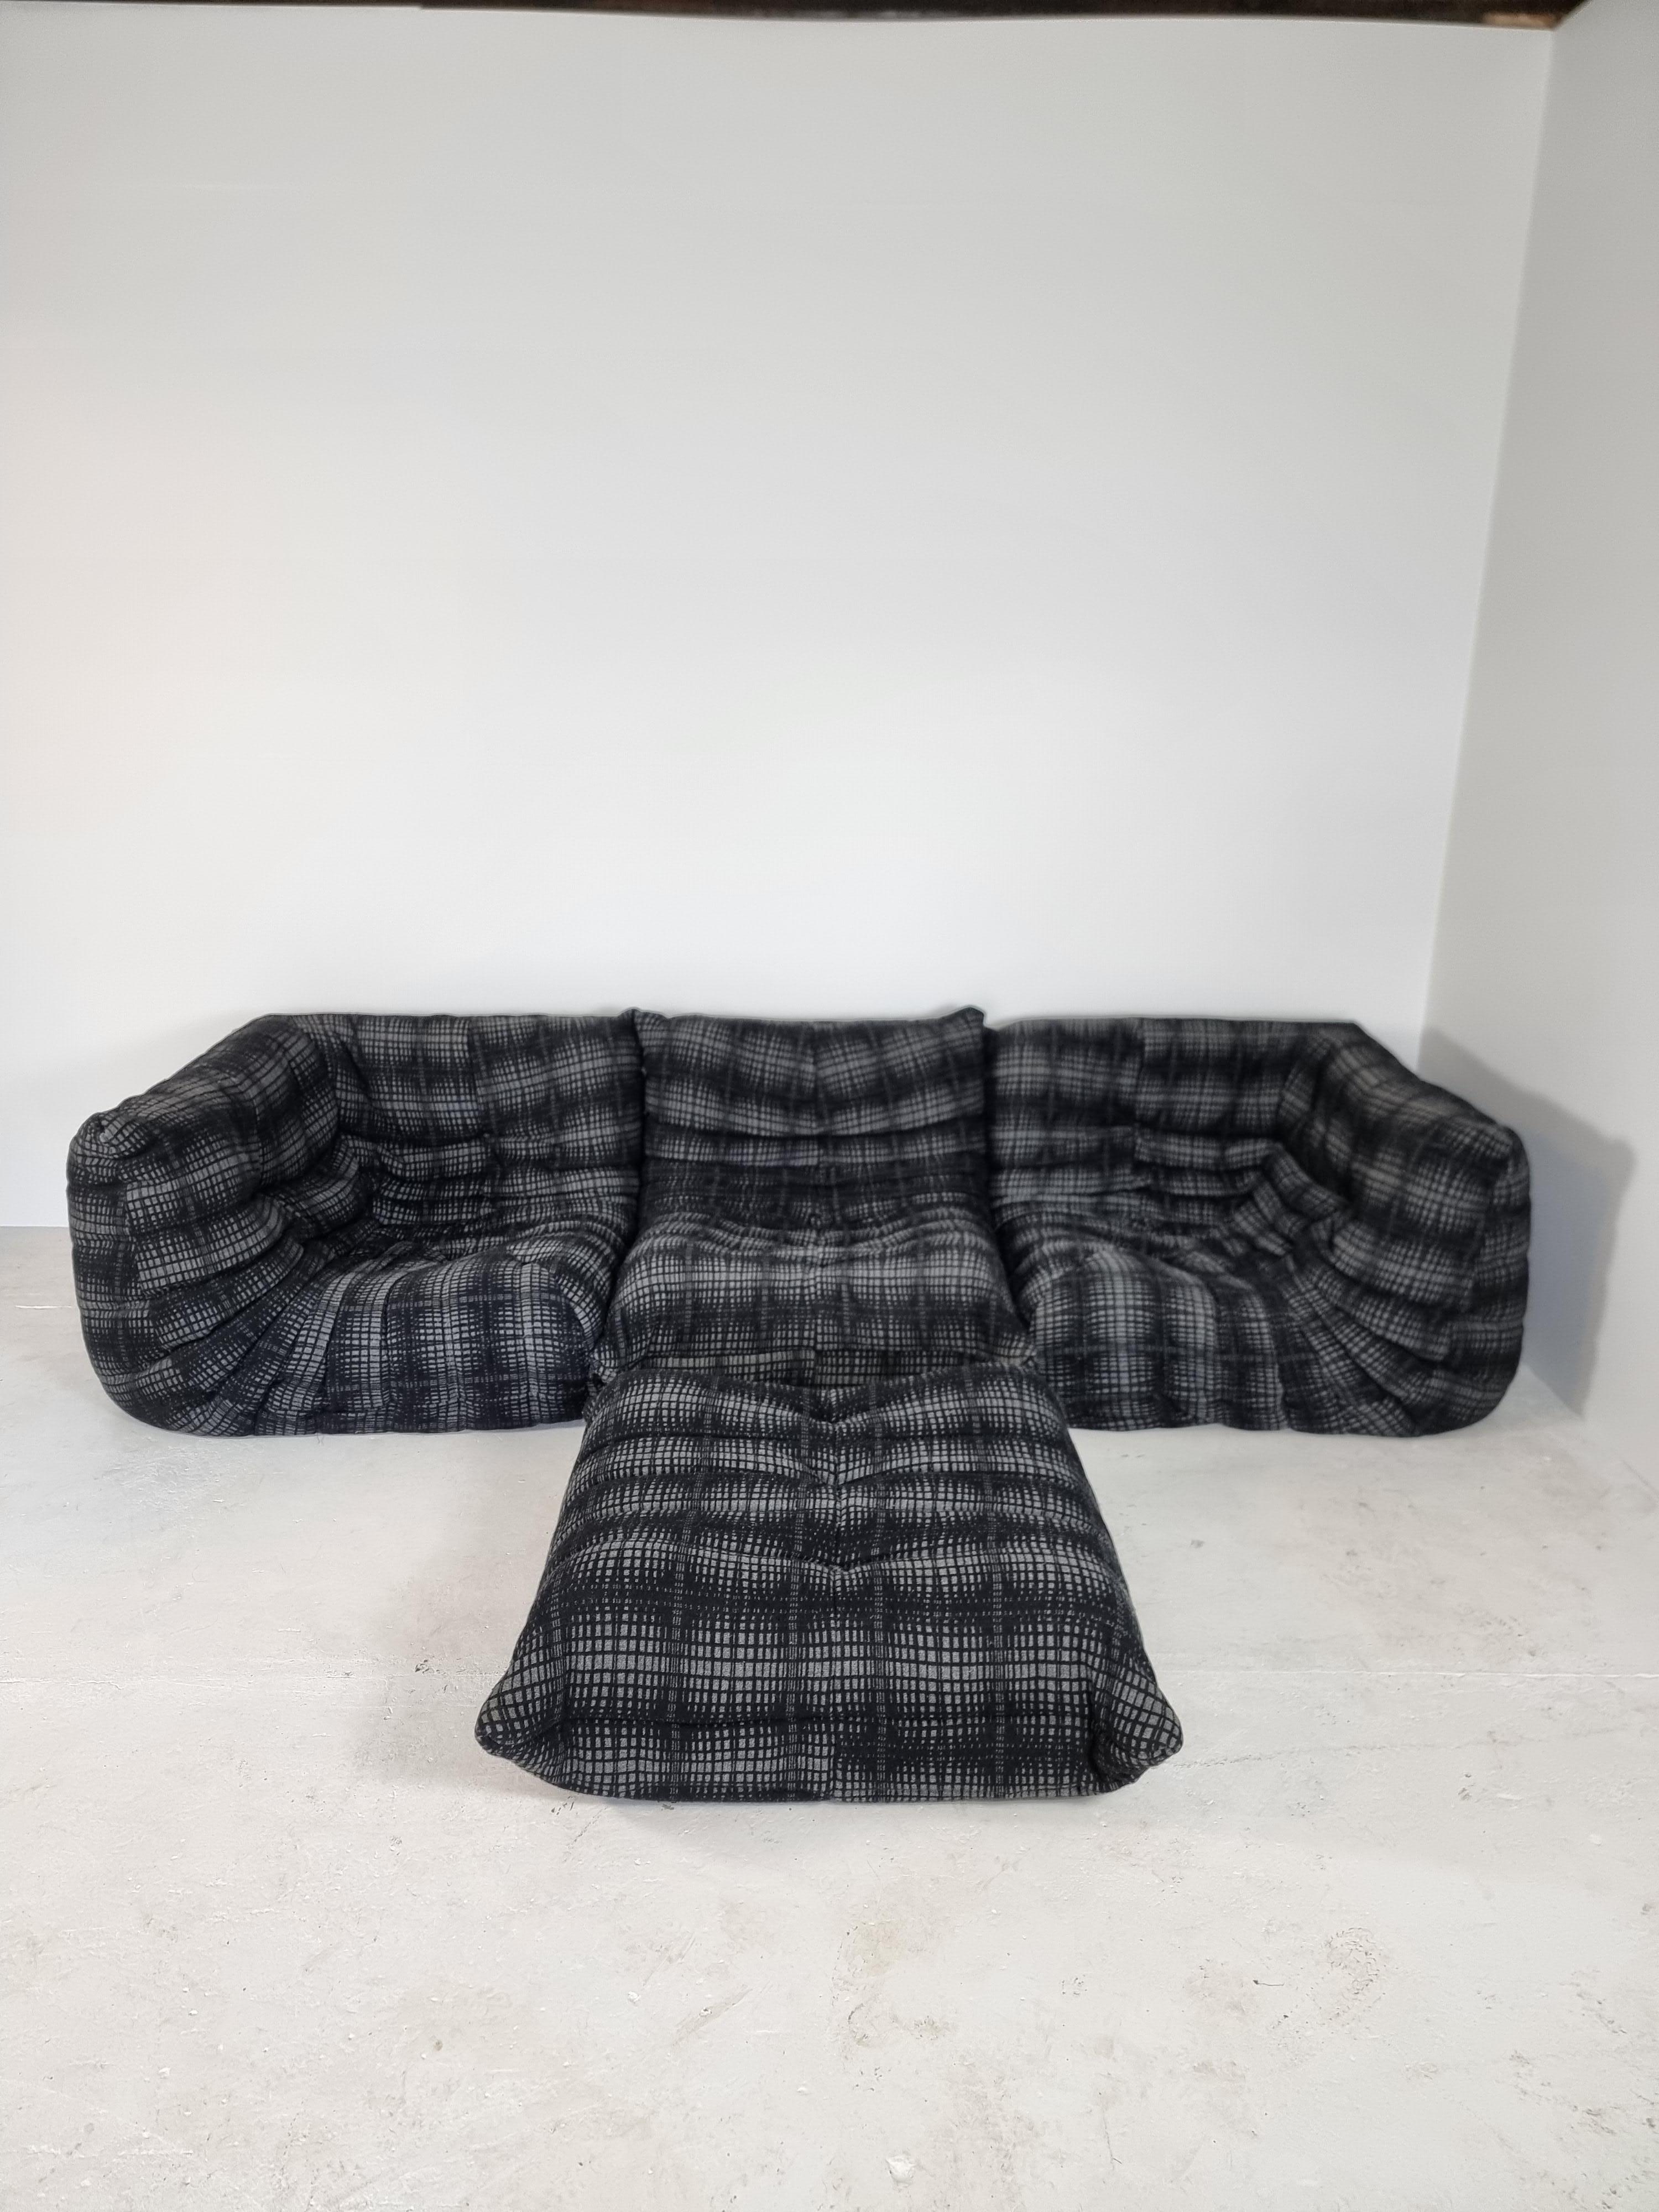 Original Ligne Roset sofa, model Togo.

Design by Michel Ducaroy.

Original wool black-grey eighties fabric.

In absolute perfect condition with original tags.